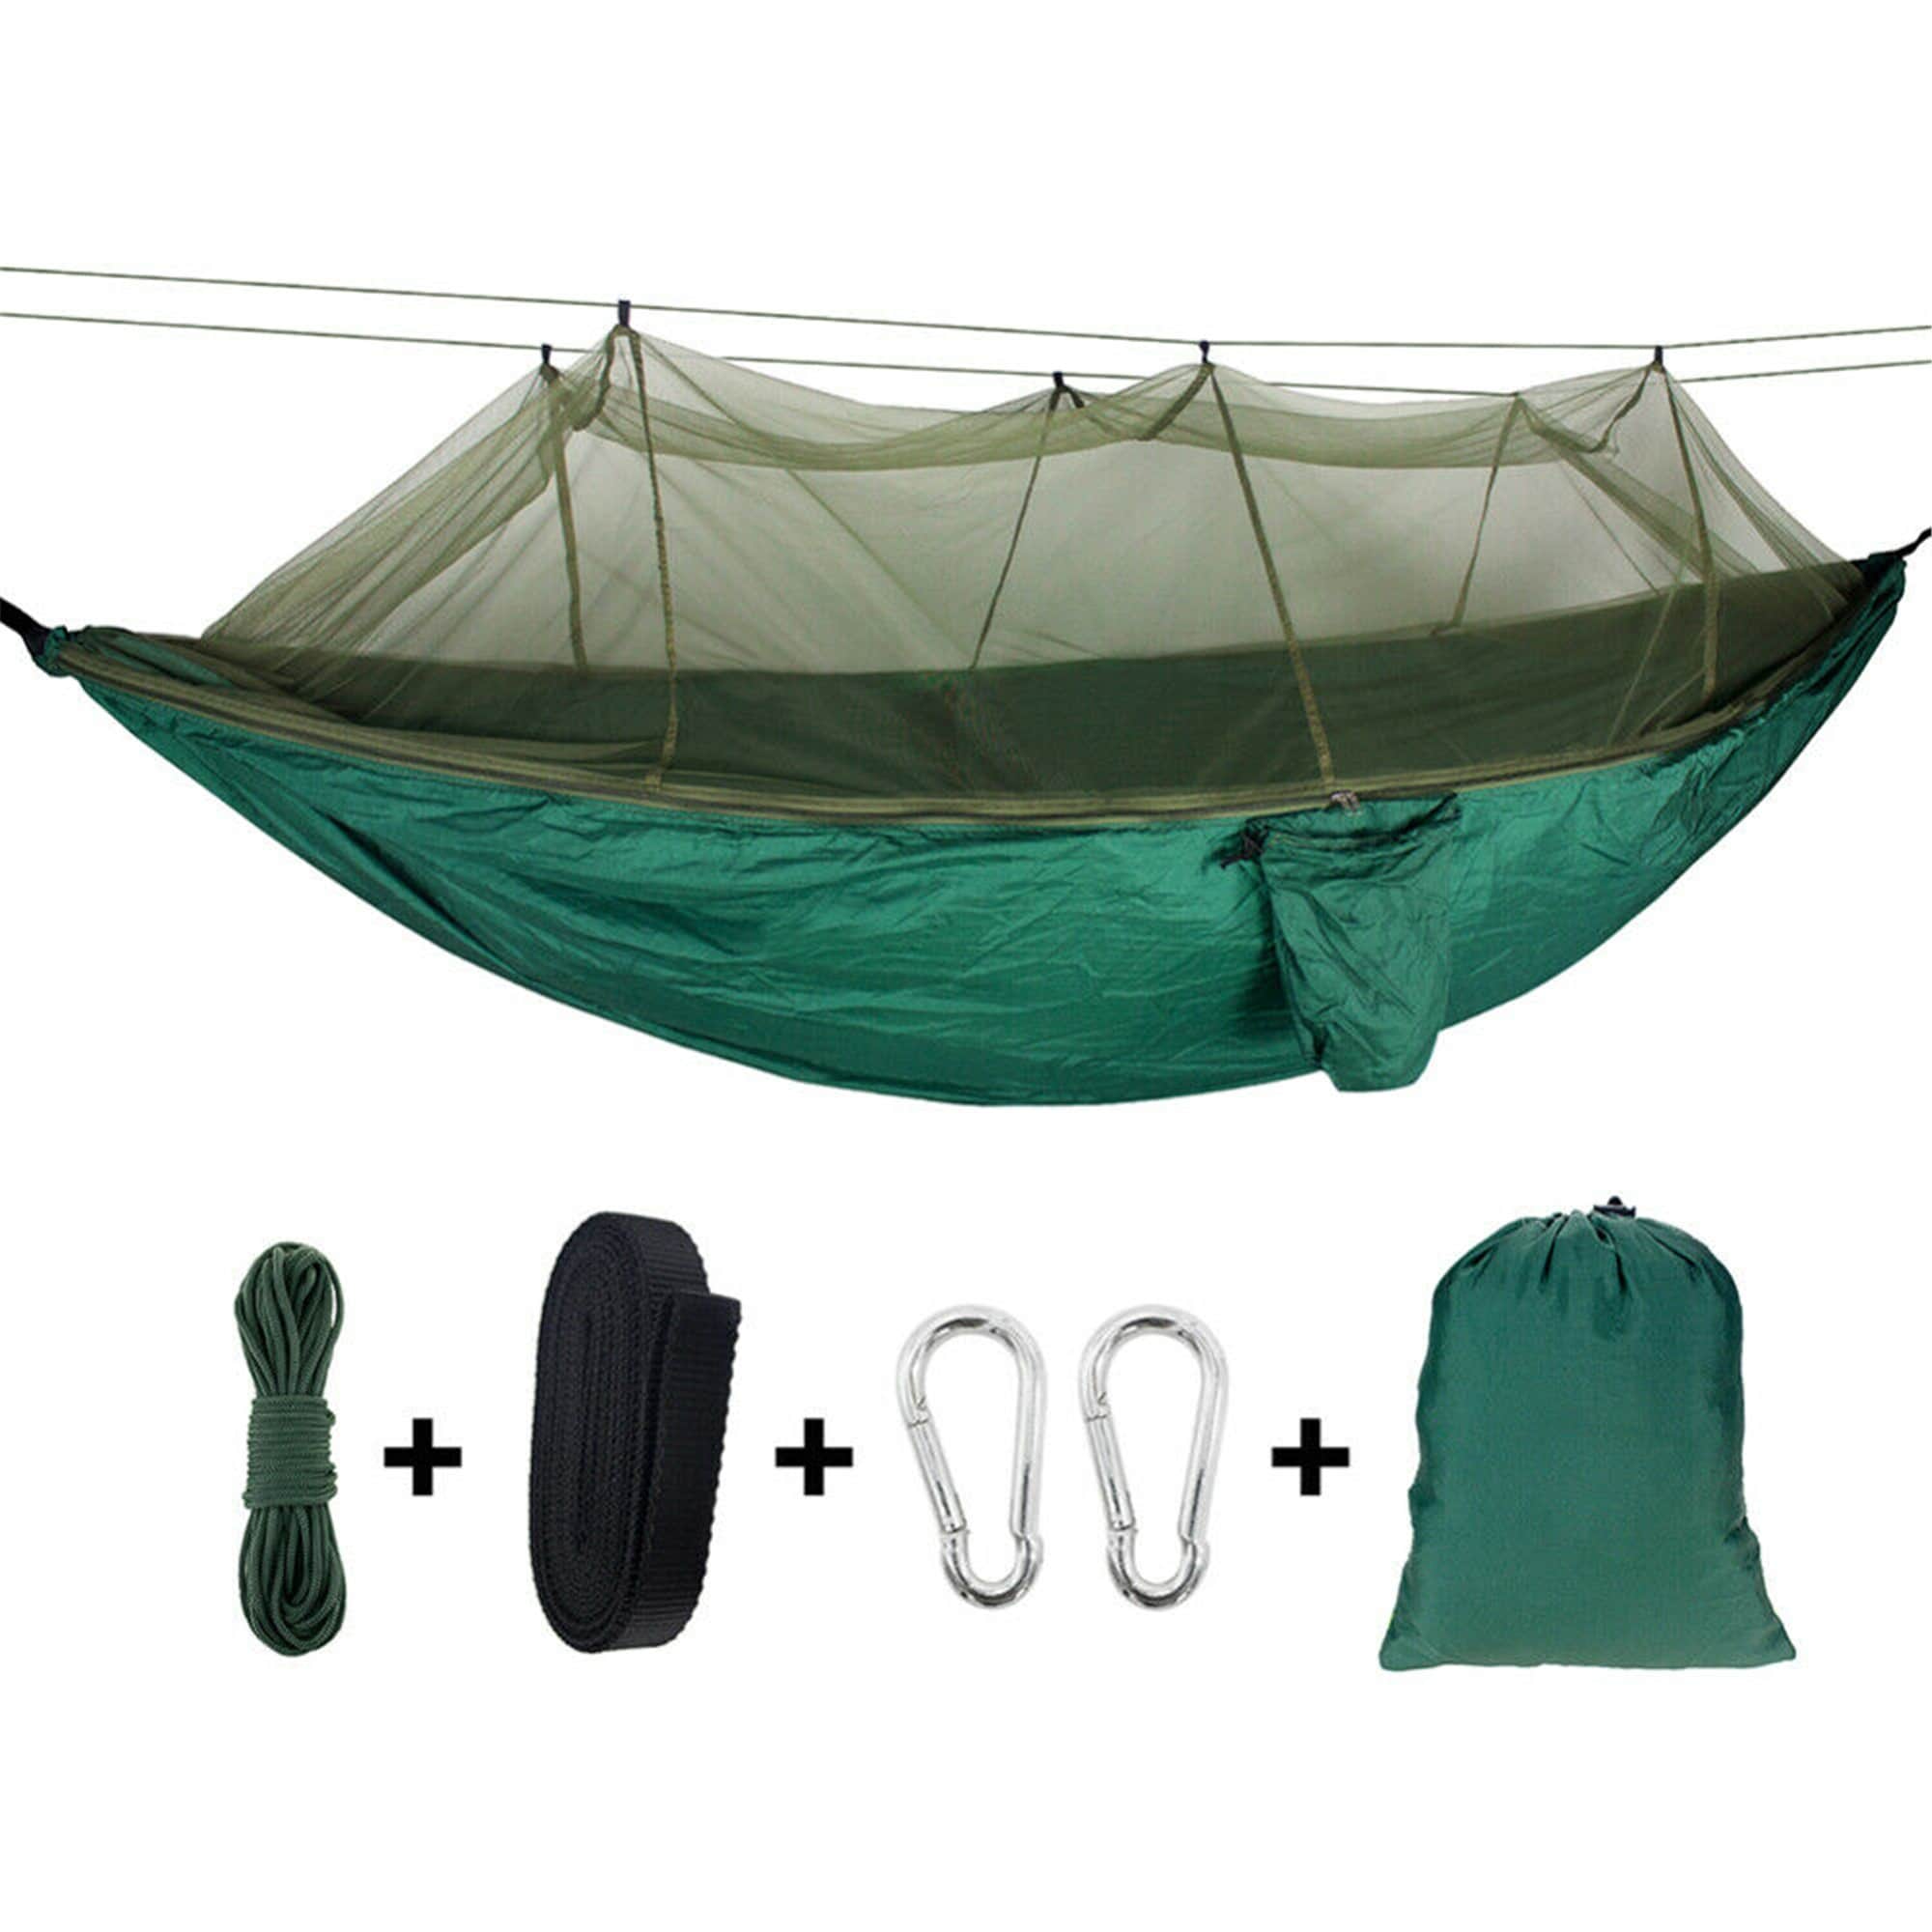 Portable Double Camping Hammock with Mosquito Net Netting Hanging Bed Outdoor 